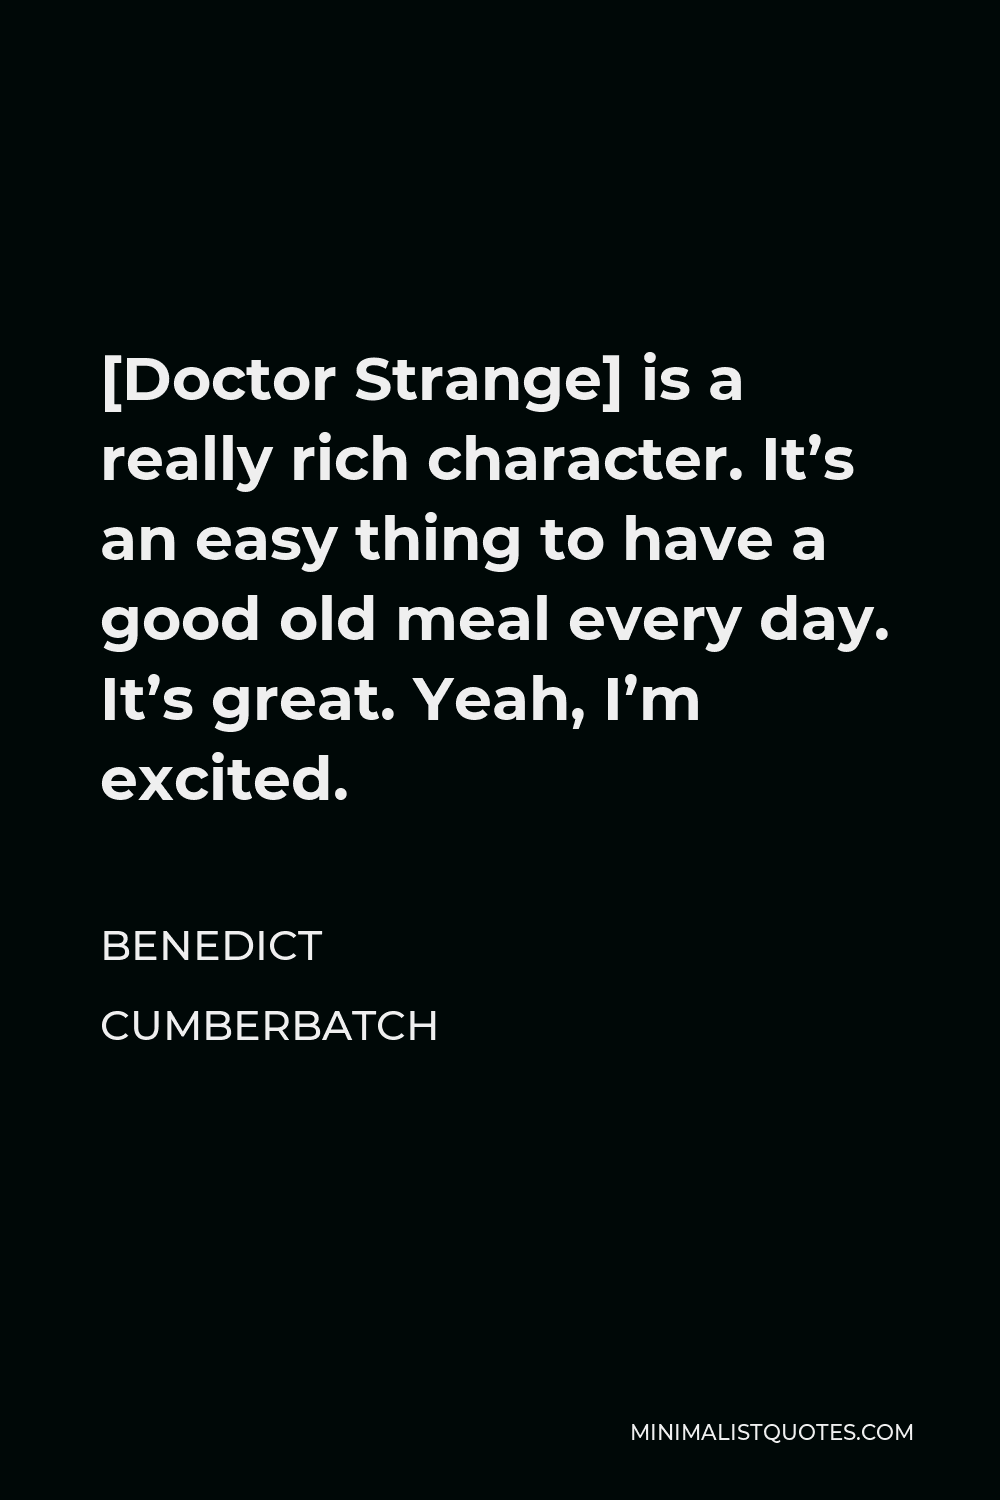 Benedict Cumberbatch Quote - [Doctor Strange] is a really rich character. It’s an easy thing to have a good old meal every day. It’s great. Yeah, I’m excited.